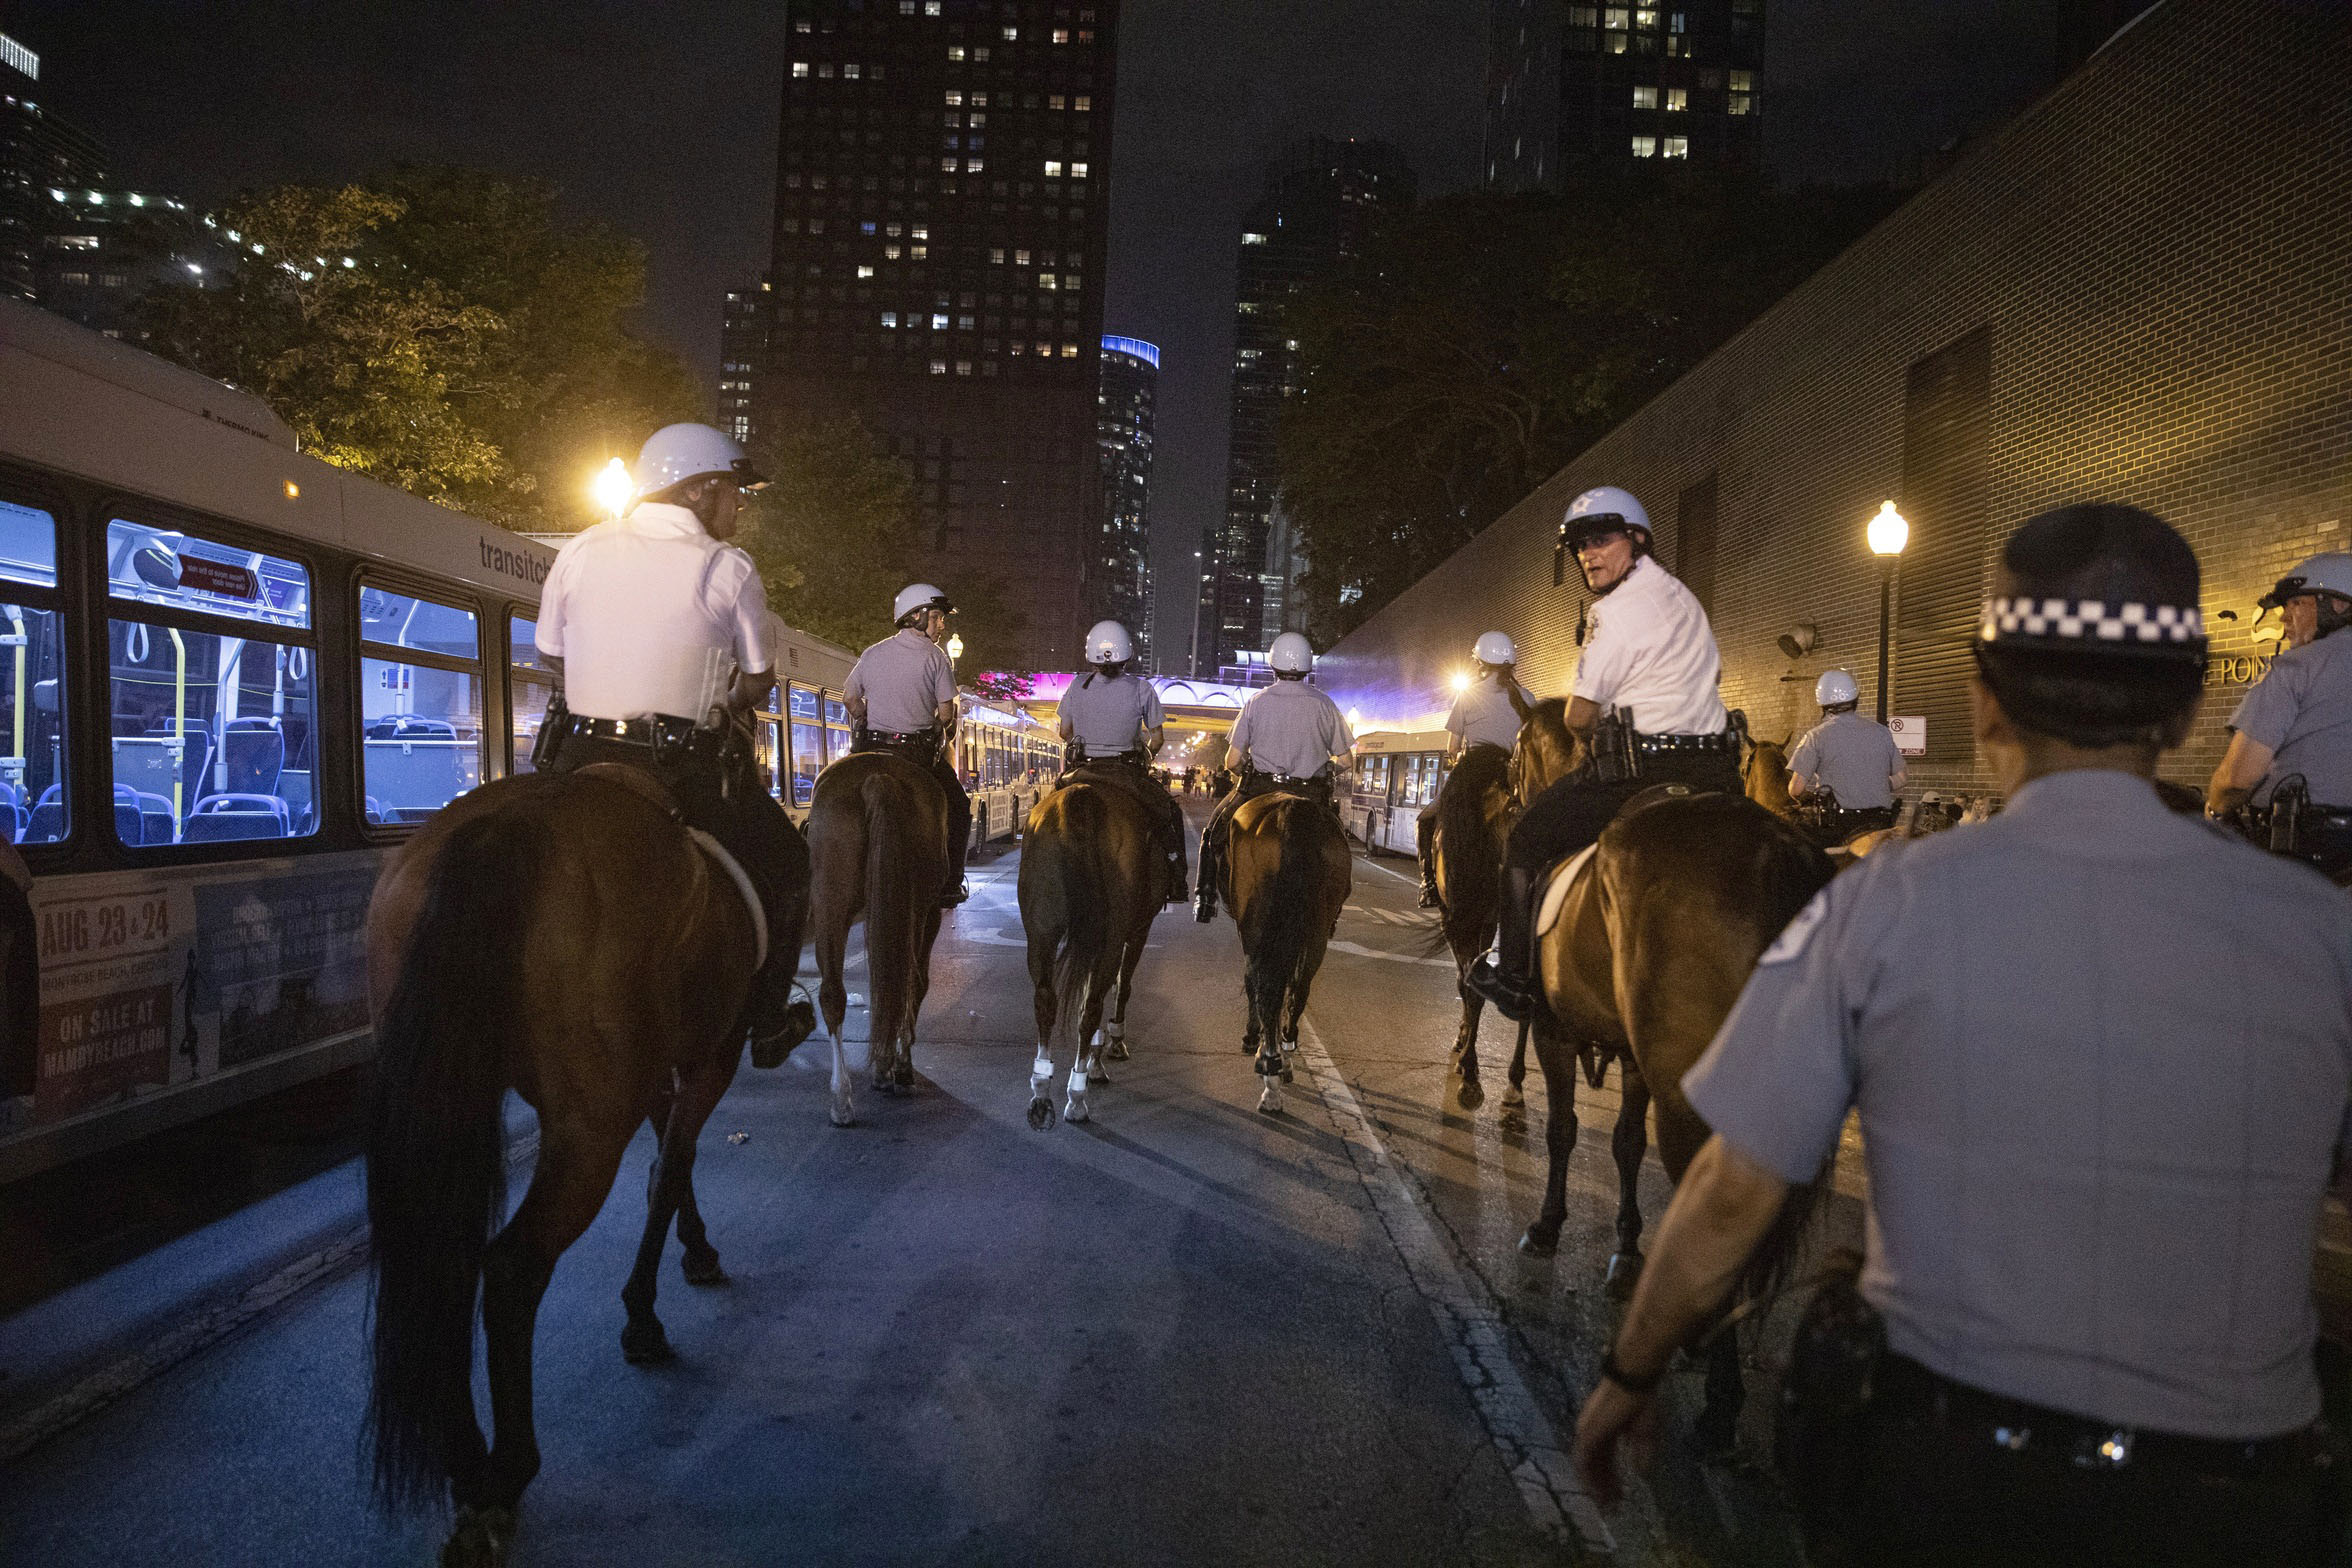 PHOTO: Chicago Police Department officers guard people as they stream out of Chicago's Navy Pier after reports of stabbings and threatening injuries after the 4th of July celebrations, July 4, 2019.